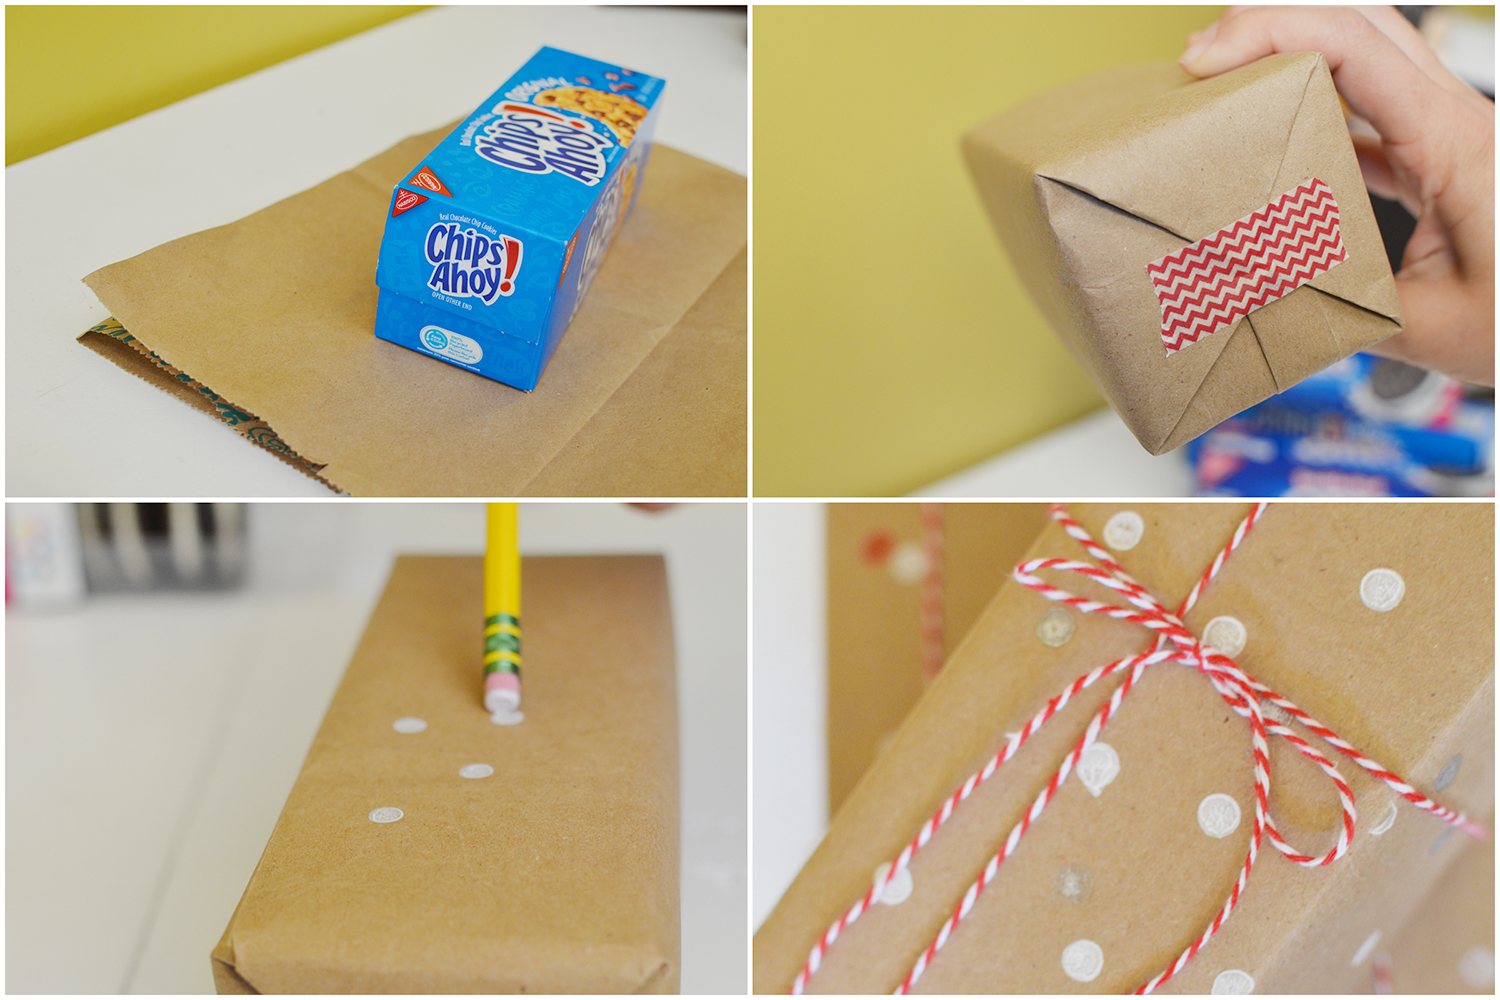 Steps to making your own wrapping paper. #shop